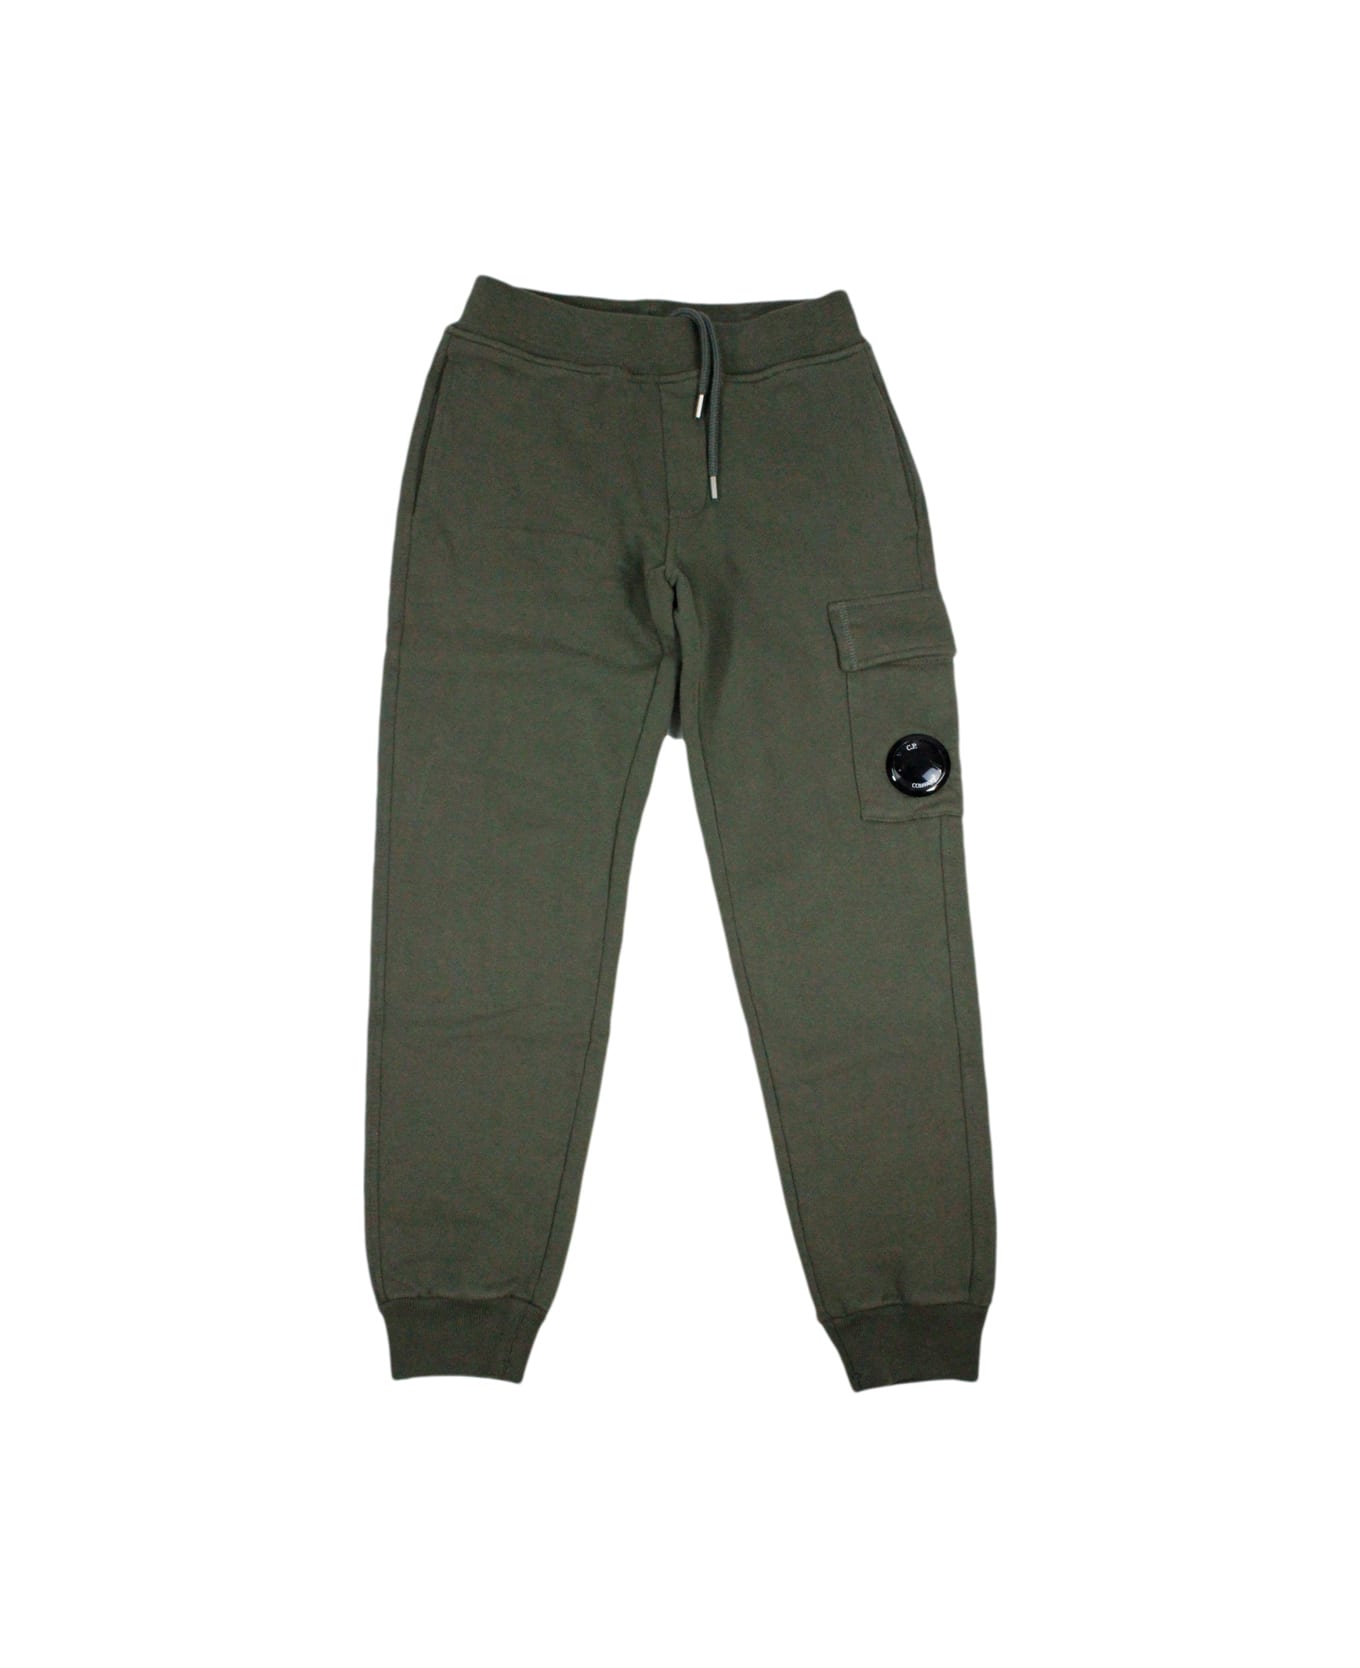 C.P. Company Breathable Fleece Cotton Trousers With Drawstring Waist - Military